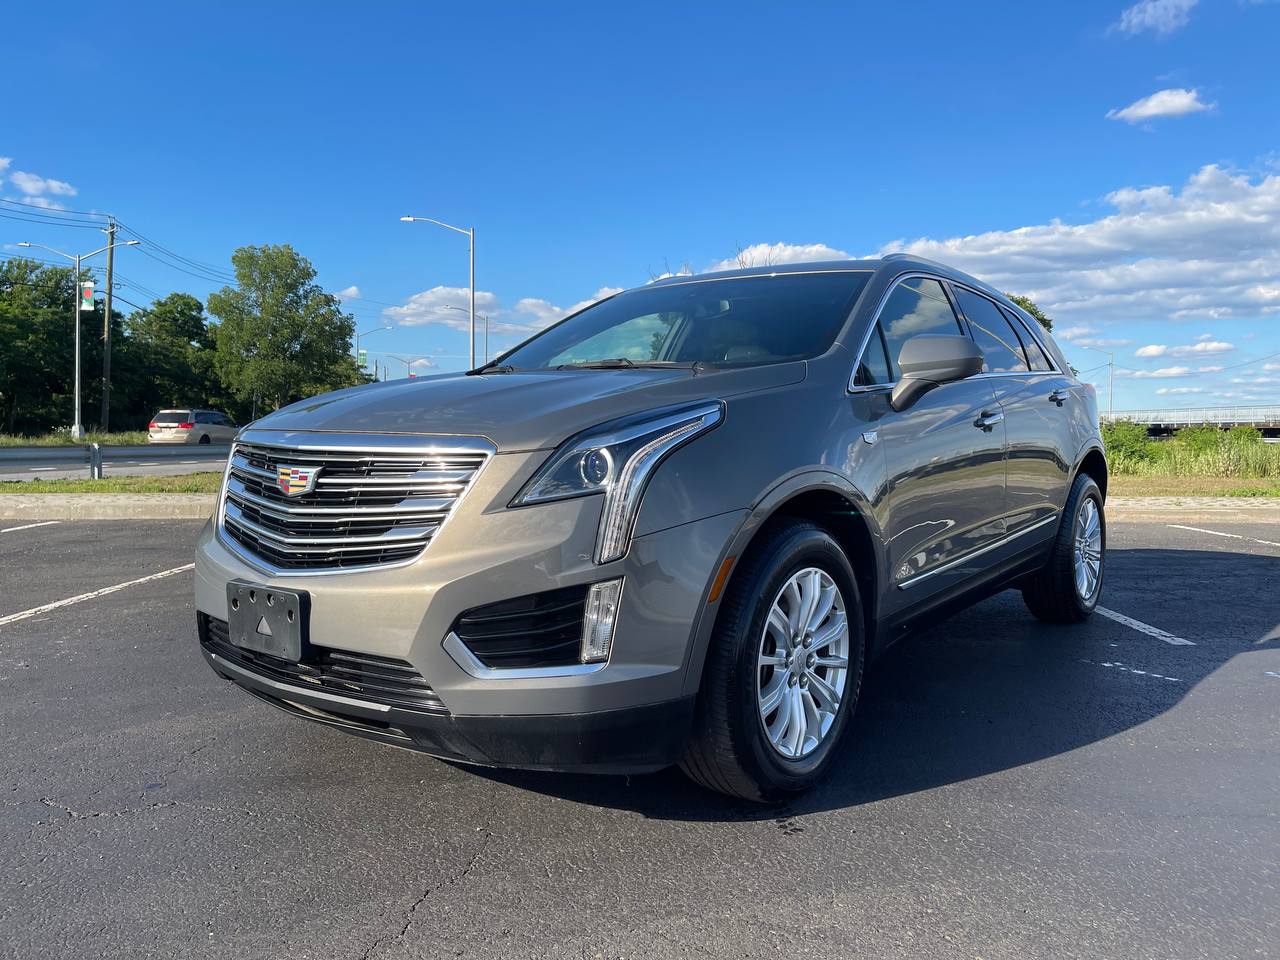 Used Car - 2018 Cadillac XT5 AWD for Sale in Staten Island, NY